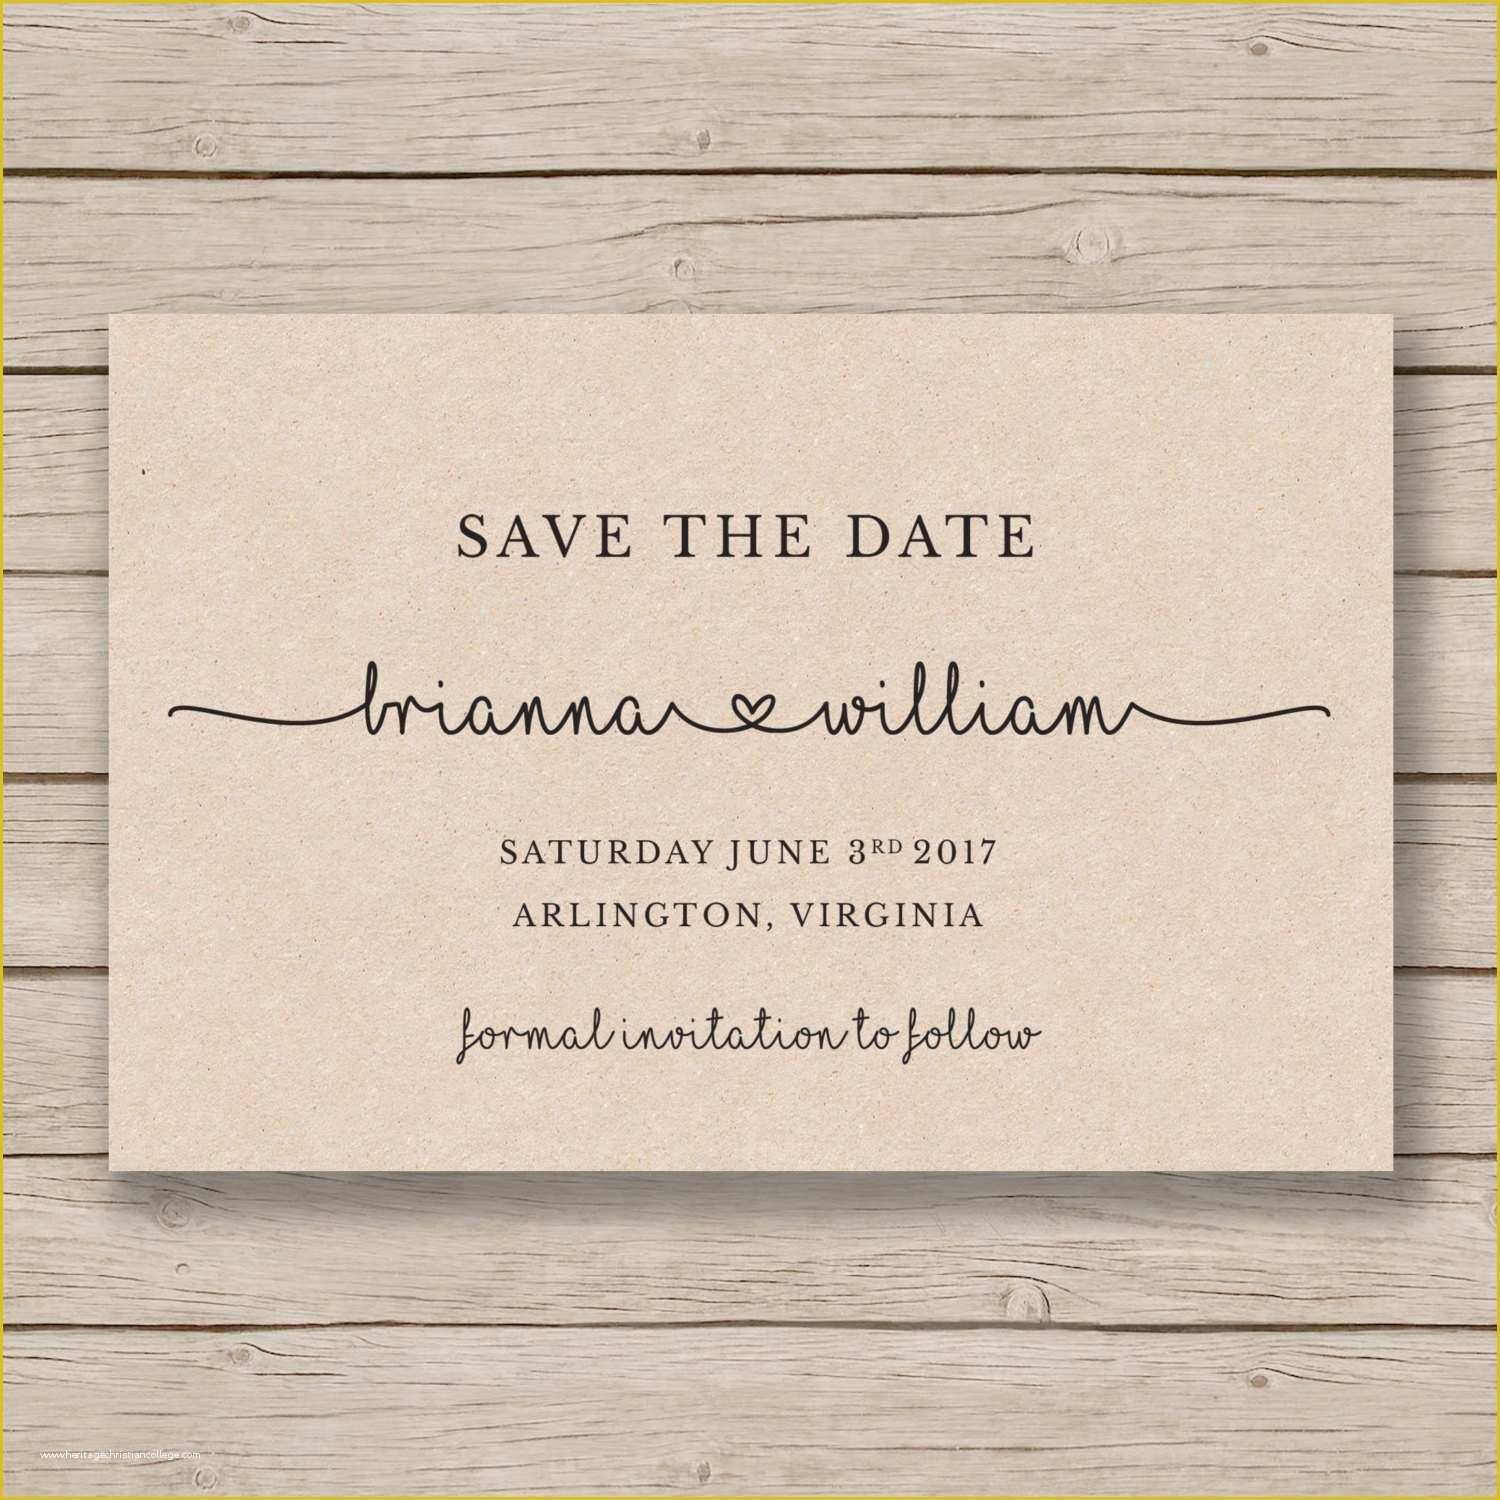 Save the Date Templates Free Online Of Save the Date Printable Template Editable by You In Word